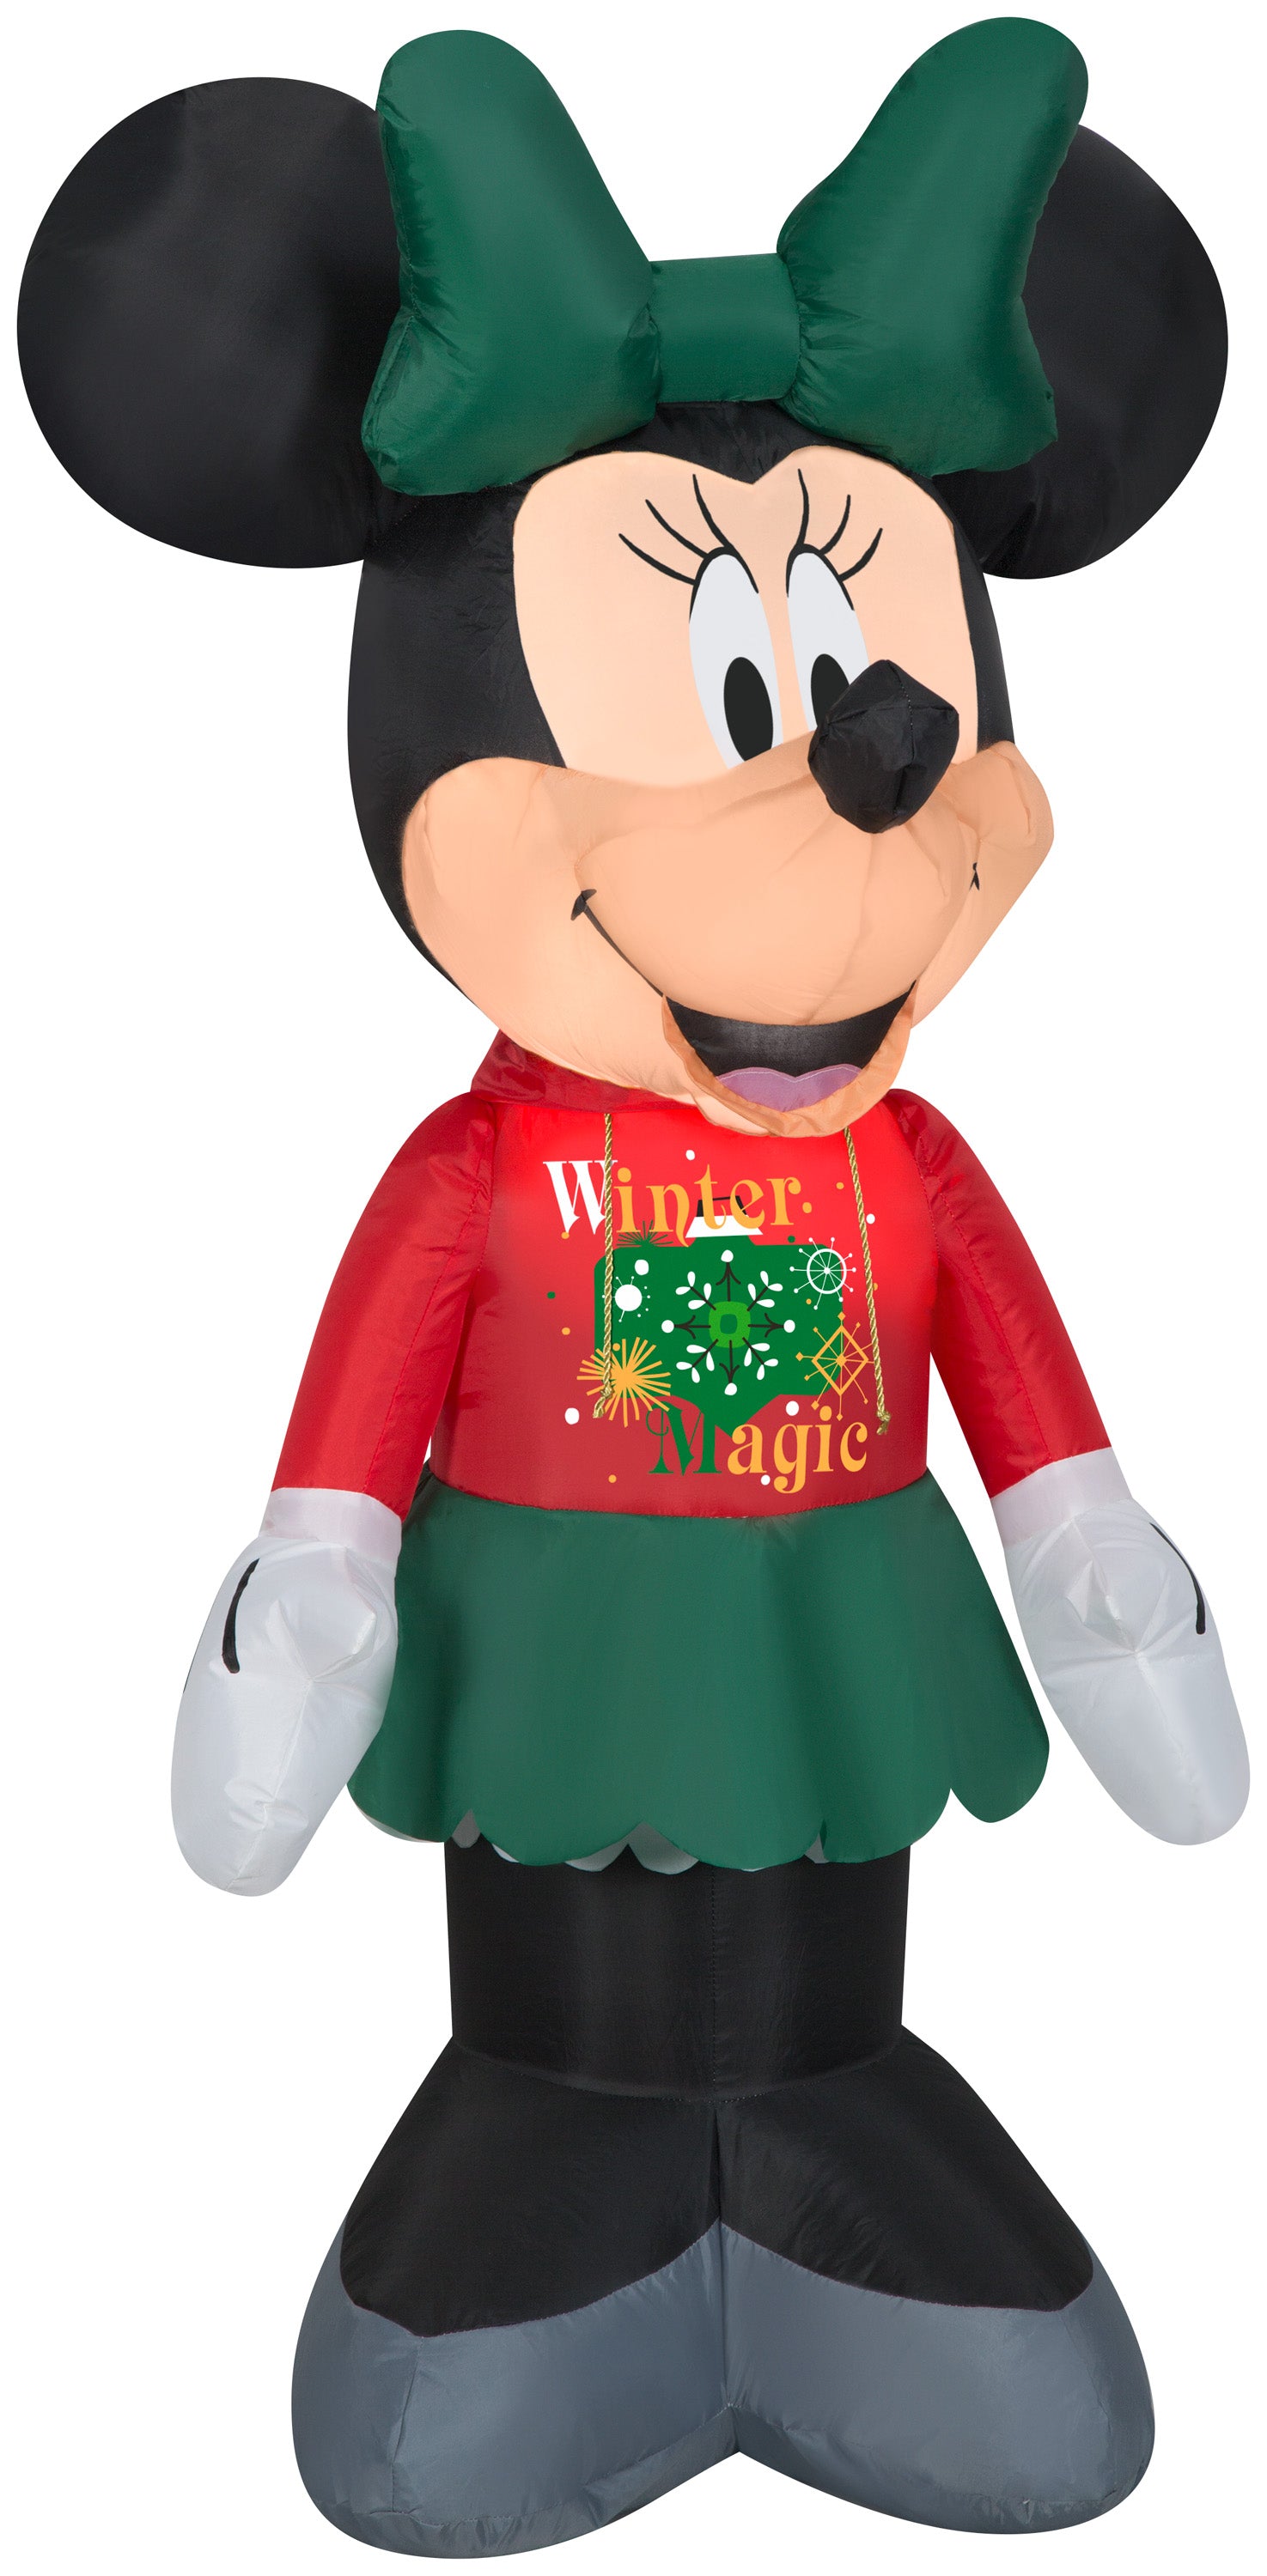 Gemmy Christmas Airblown Inflatable Minnie in Christmas Decor Hoodie Disney, 3.5 ft Tall